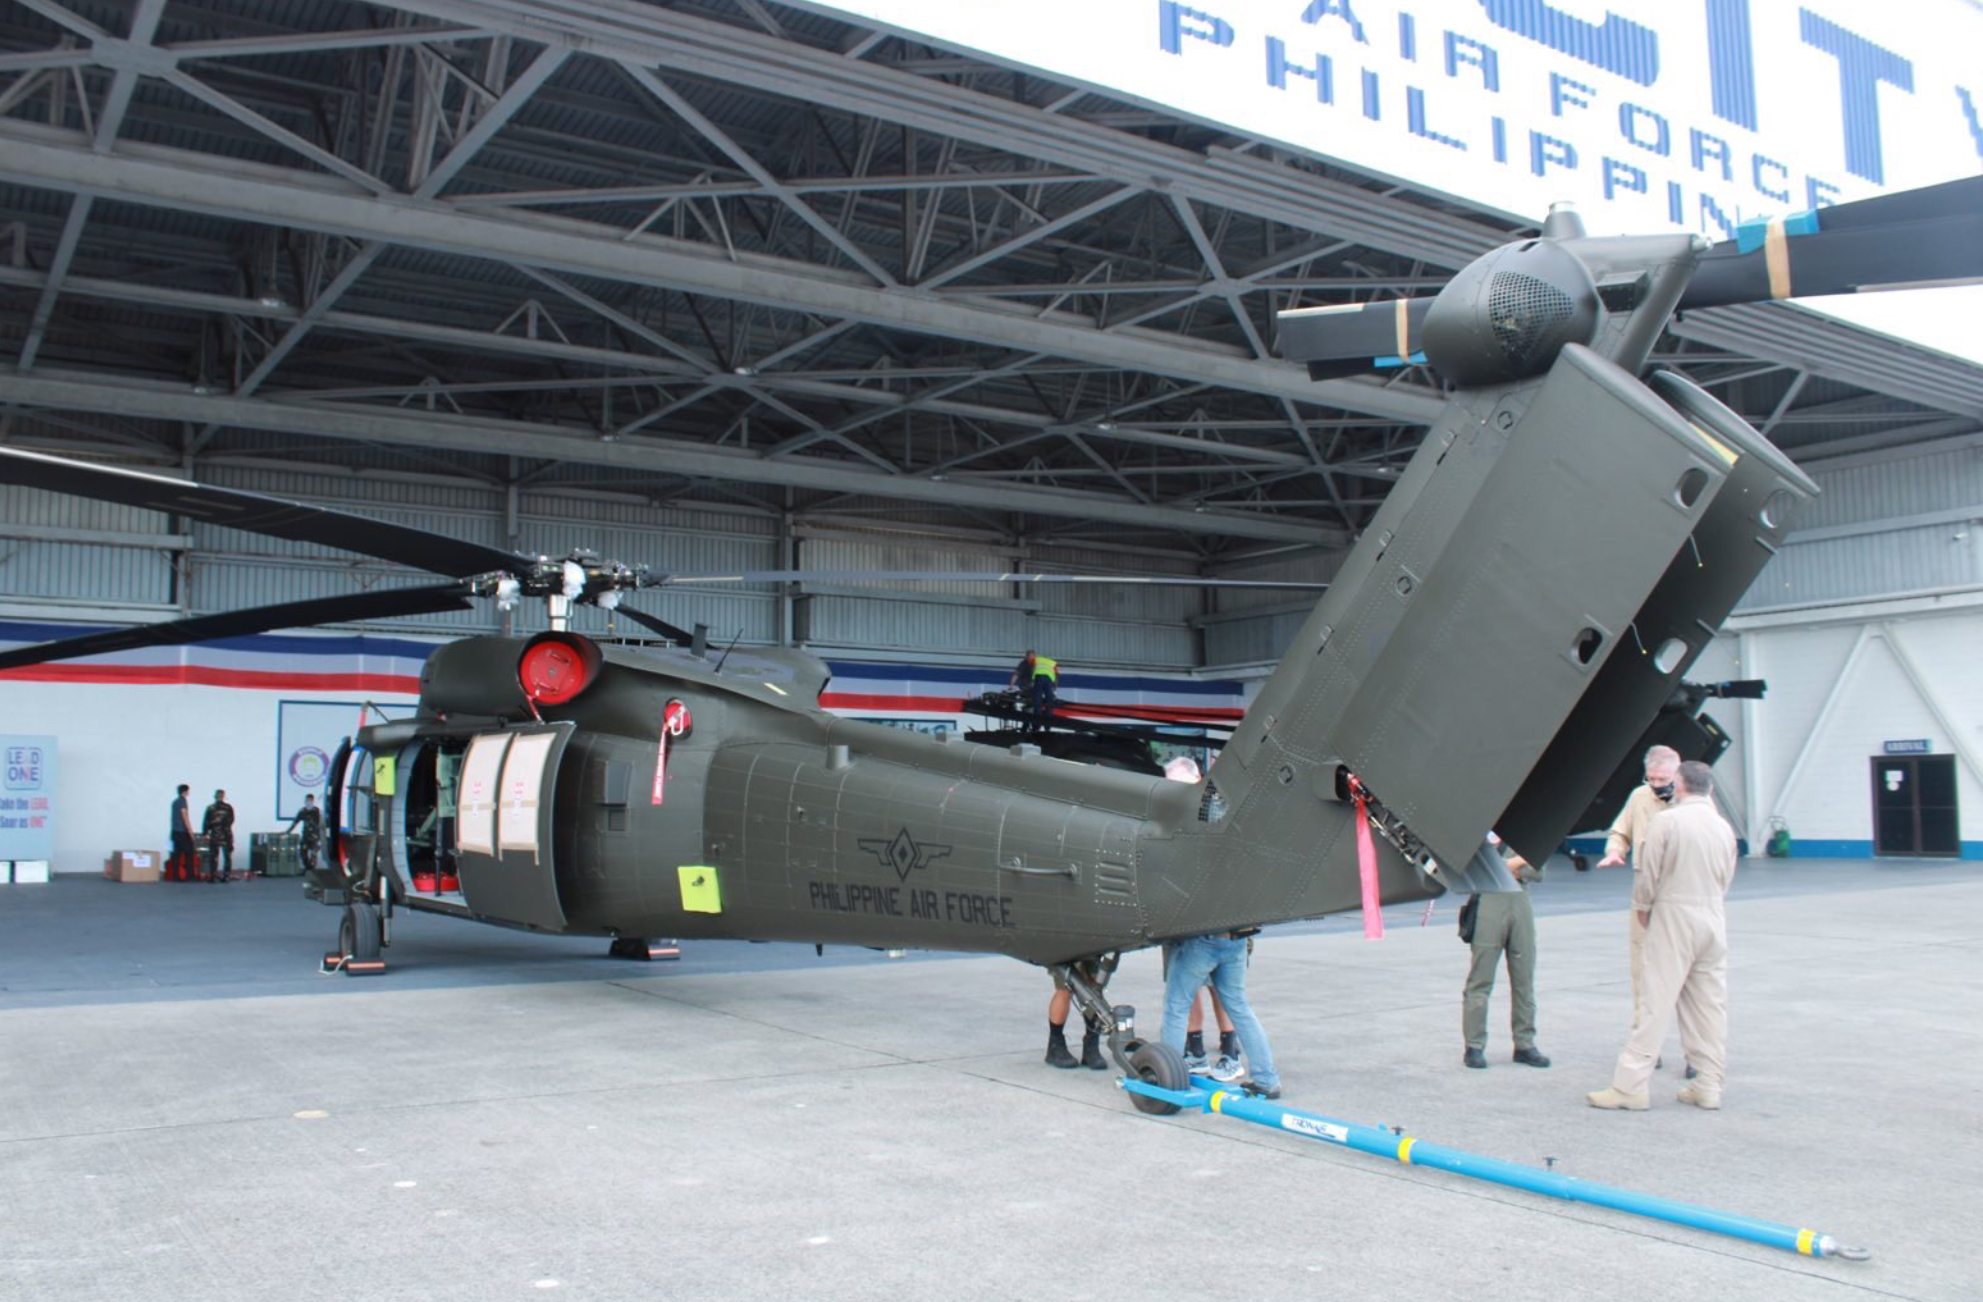 military huey helicopter for sale